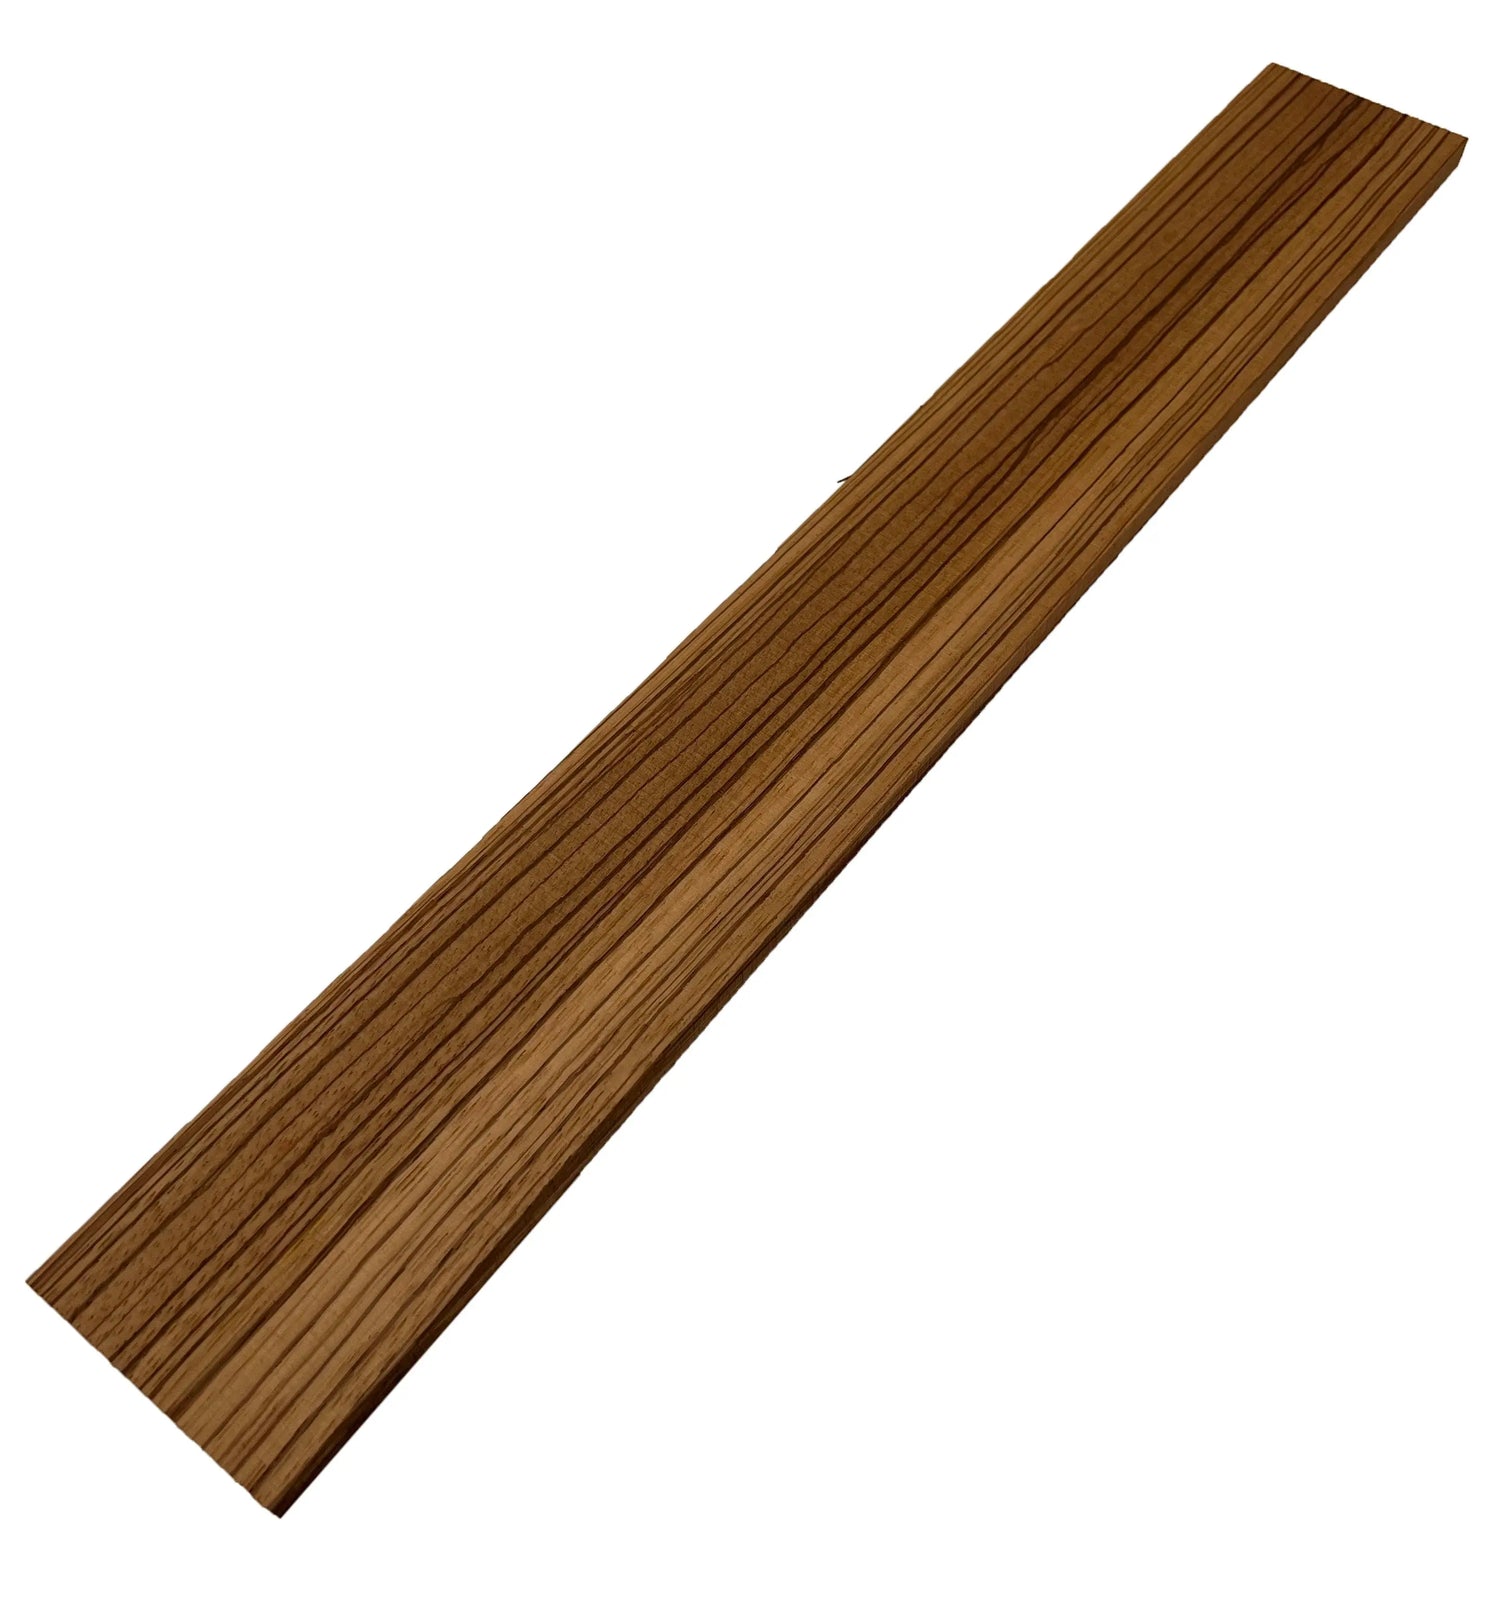 Zebrawood Thin Stock Lumber Boards Wood Crafts - Exotic Wood Zone – Exotic  Wood Zone